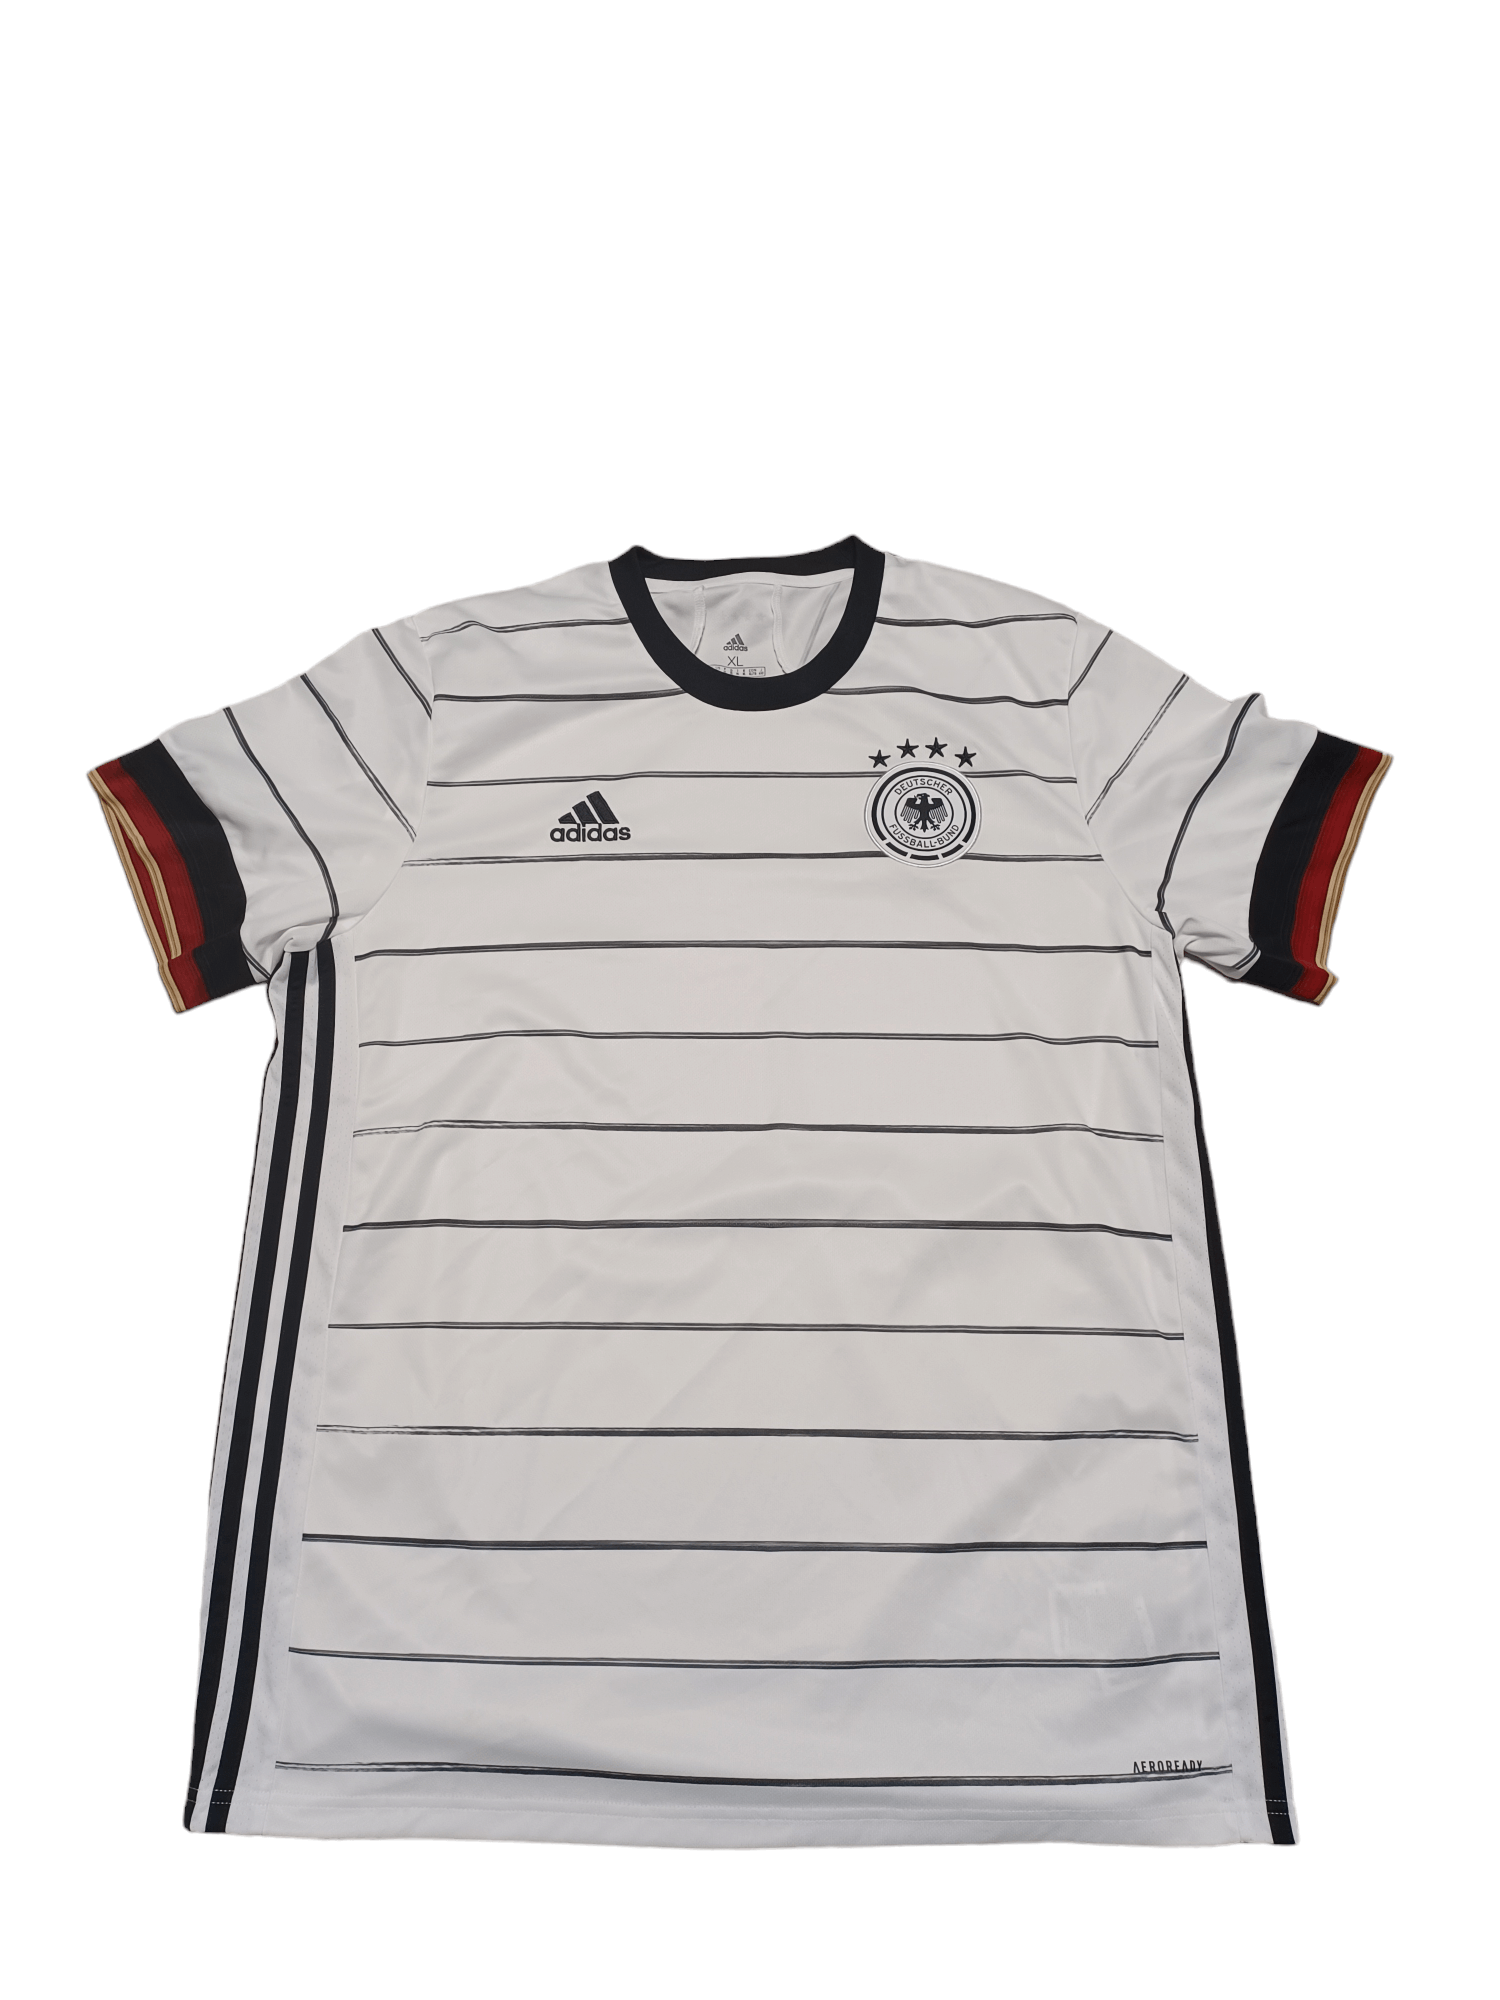 Pre-owned Adidas X Soccer Jersey 2019 Vintage Germany National Team Deutschland Soccer Jersey In White